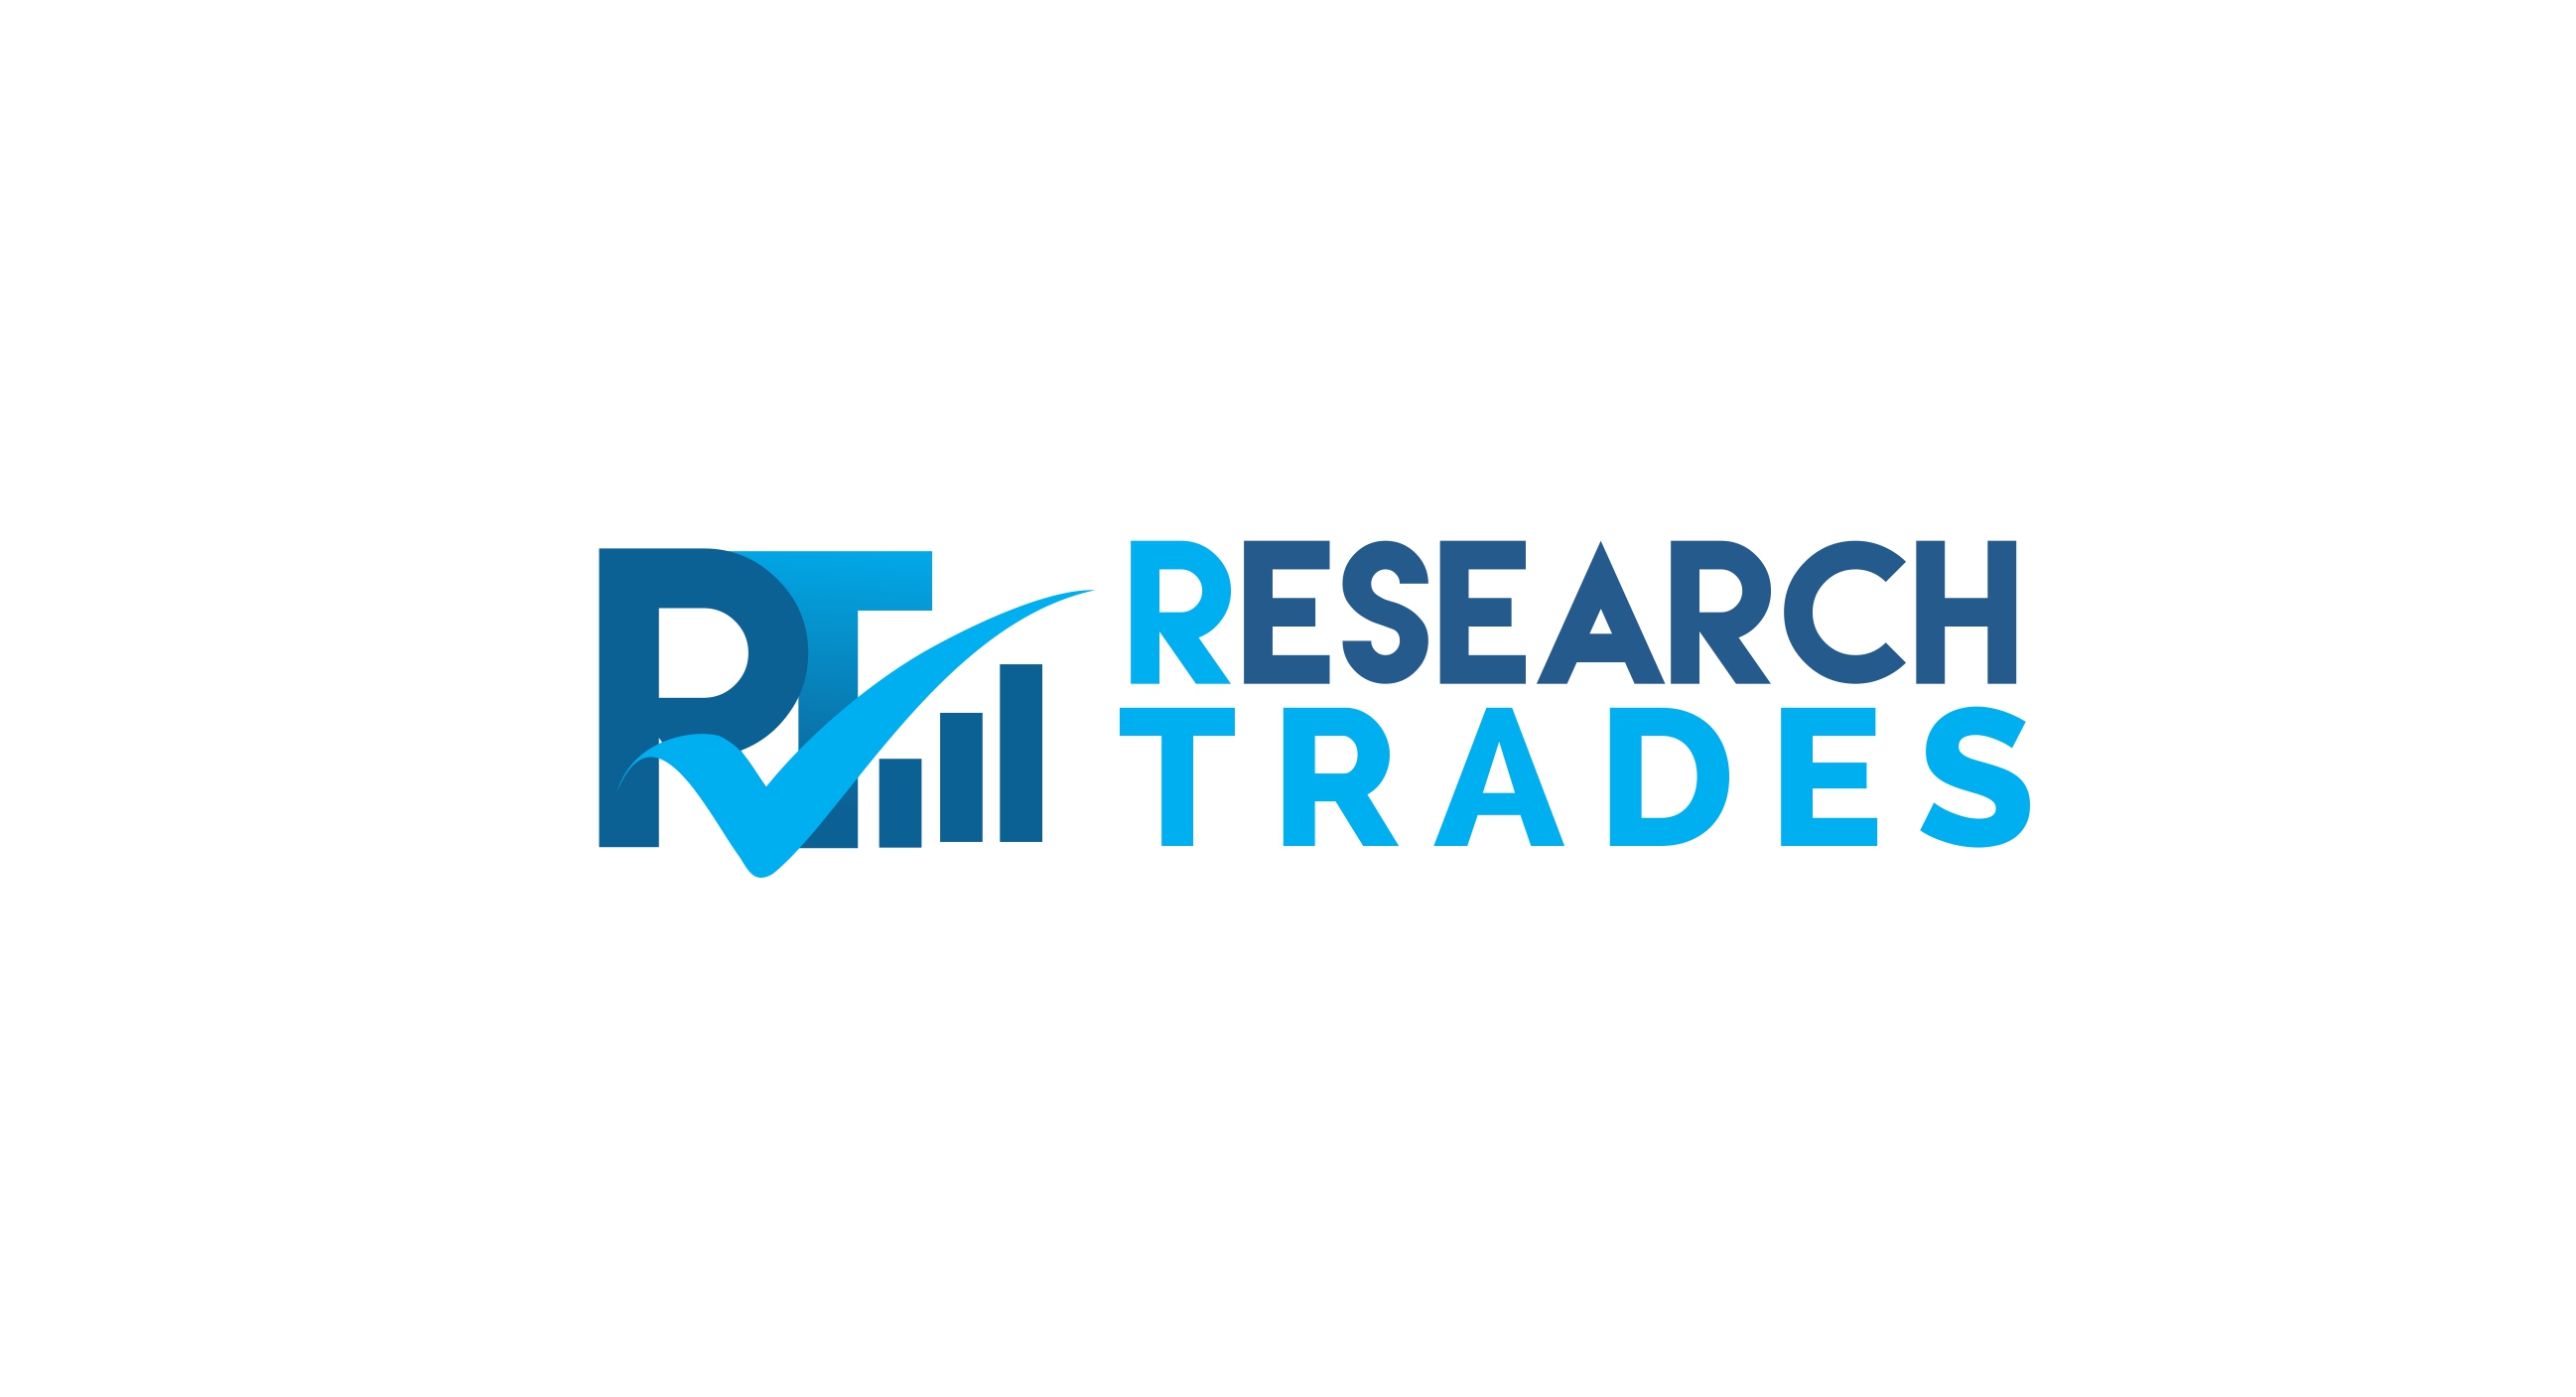 Global Feed Electrolytes Market Demand By Top Key Players Like Archer Daniels Midland Co., Cargill Inc., Royal DSM, BASF SE, DuPont and Others 2018 - 2025